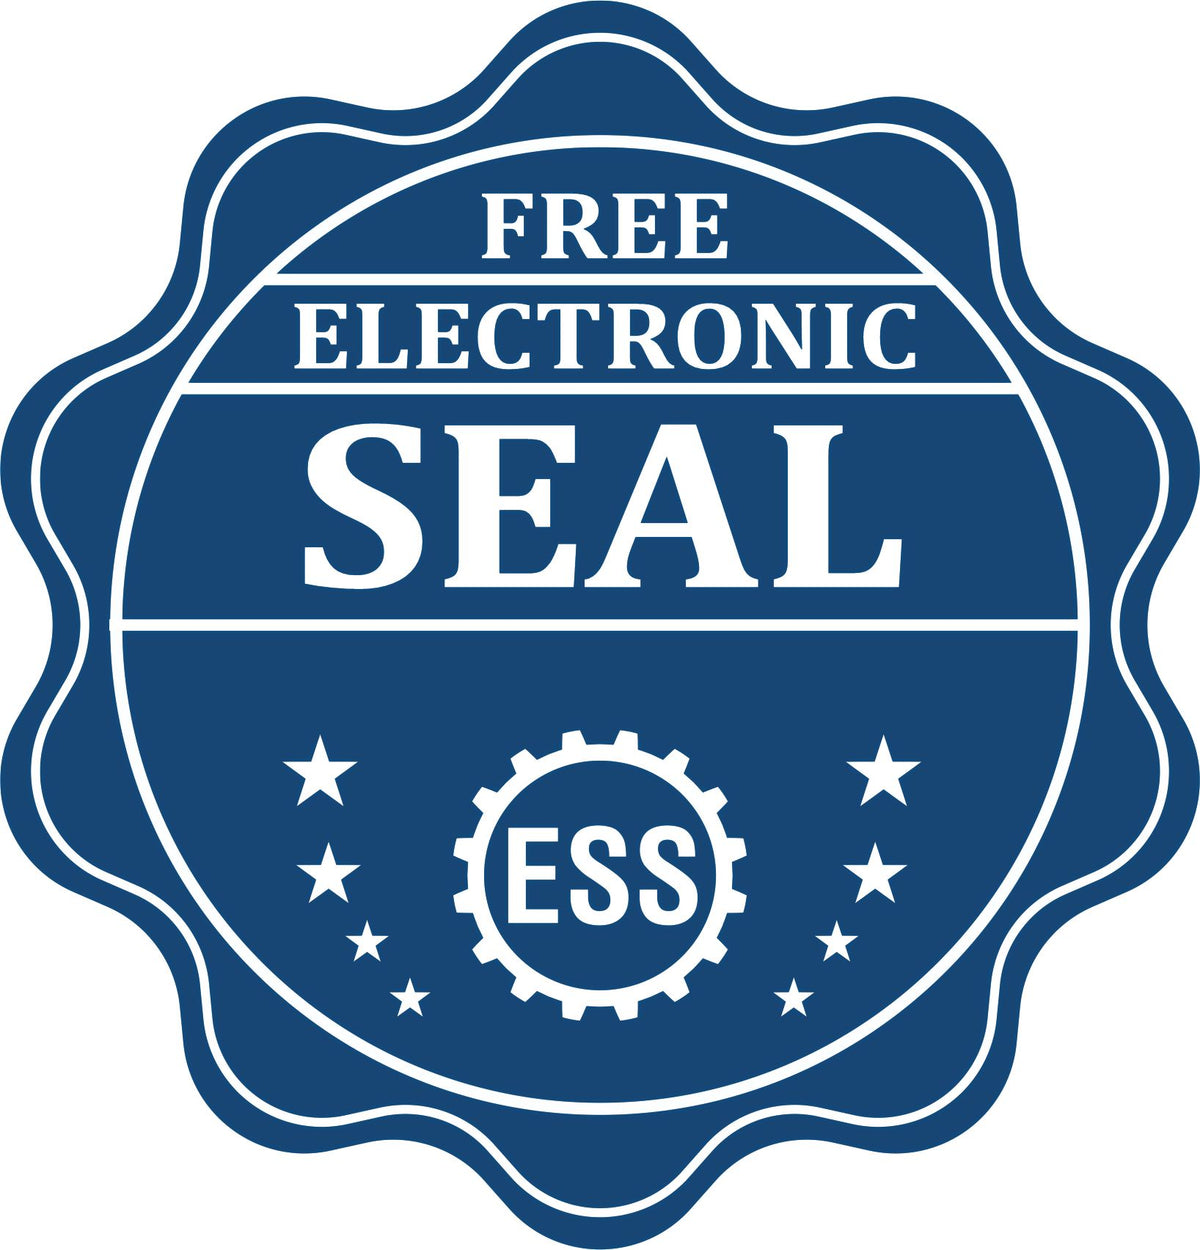 A badge showing a free electronic seal for the Hybrid Wyoming Landscape Architect Seal with stars and the ESS gear on the emblem.